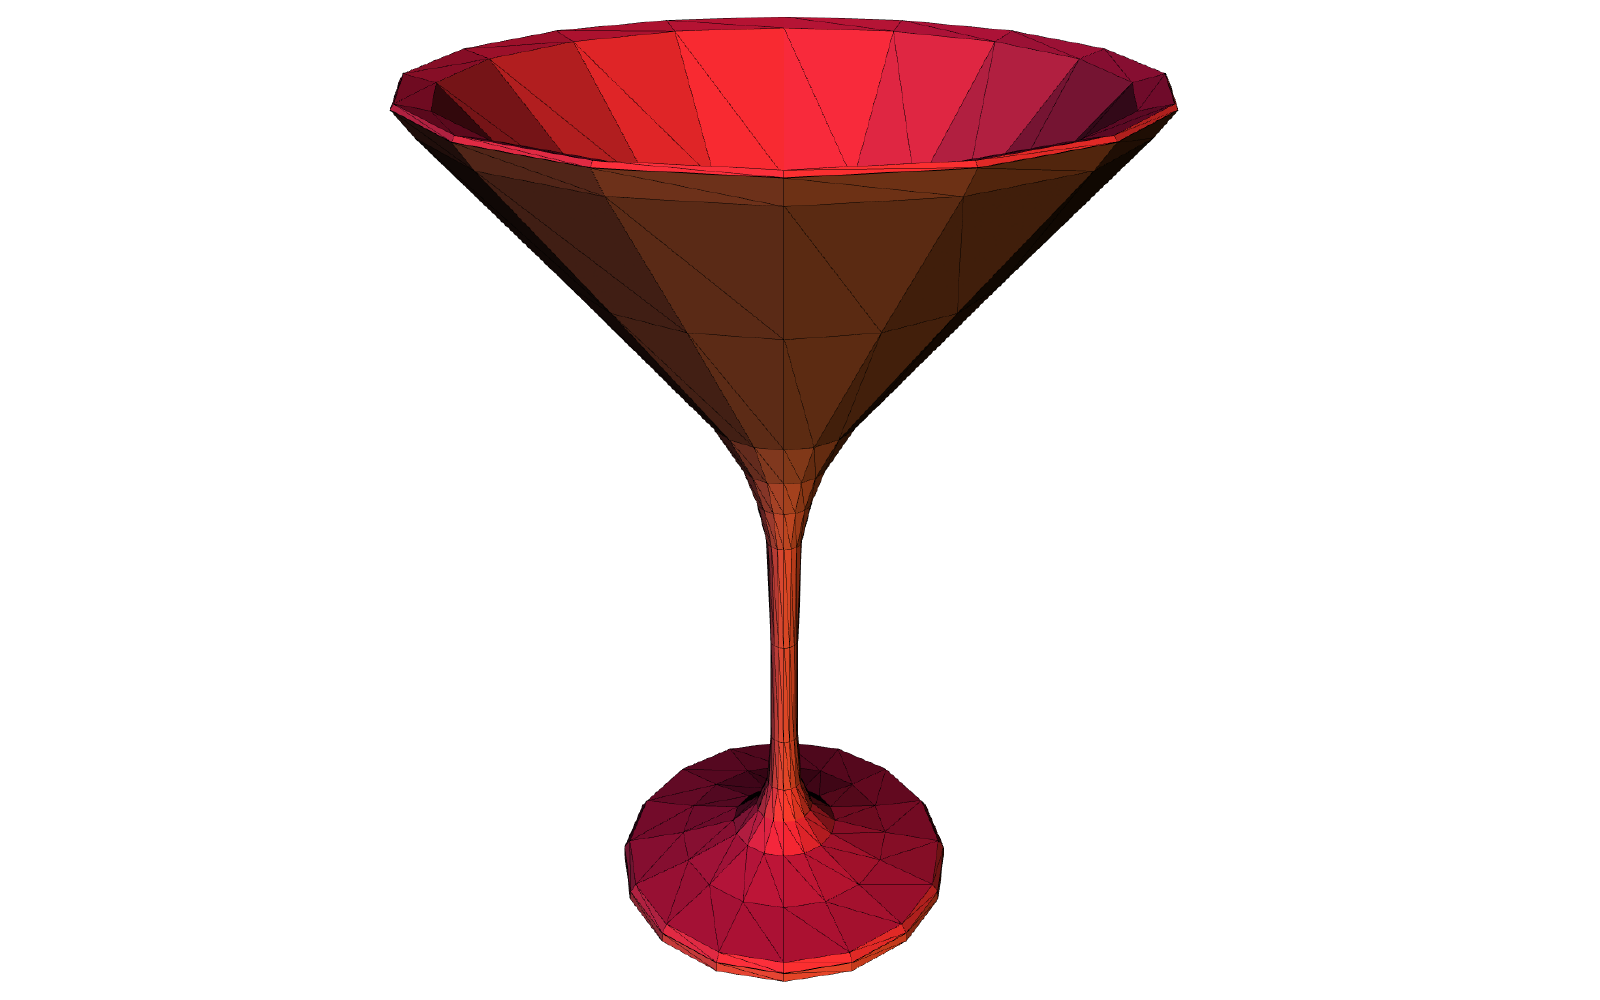 3D Model of a Cocktail Glass For Drawing Reference